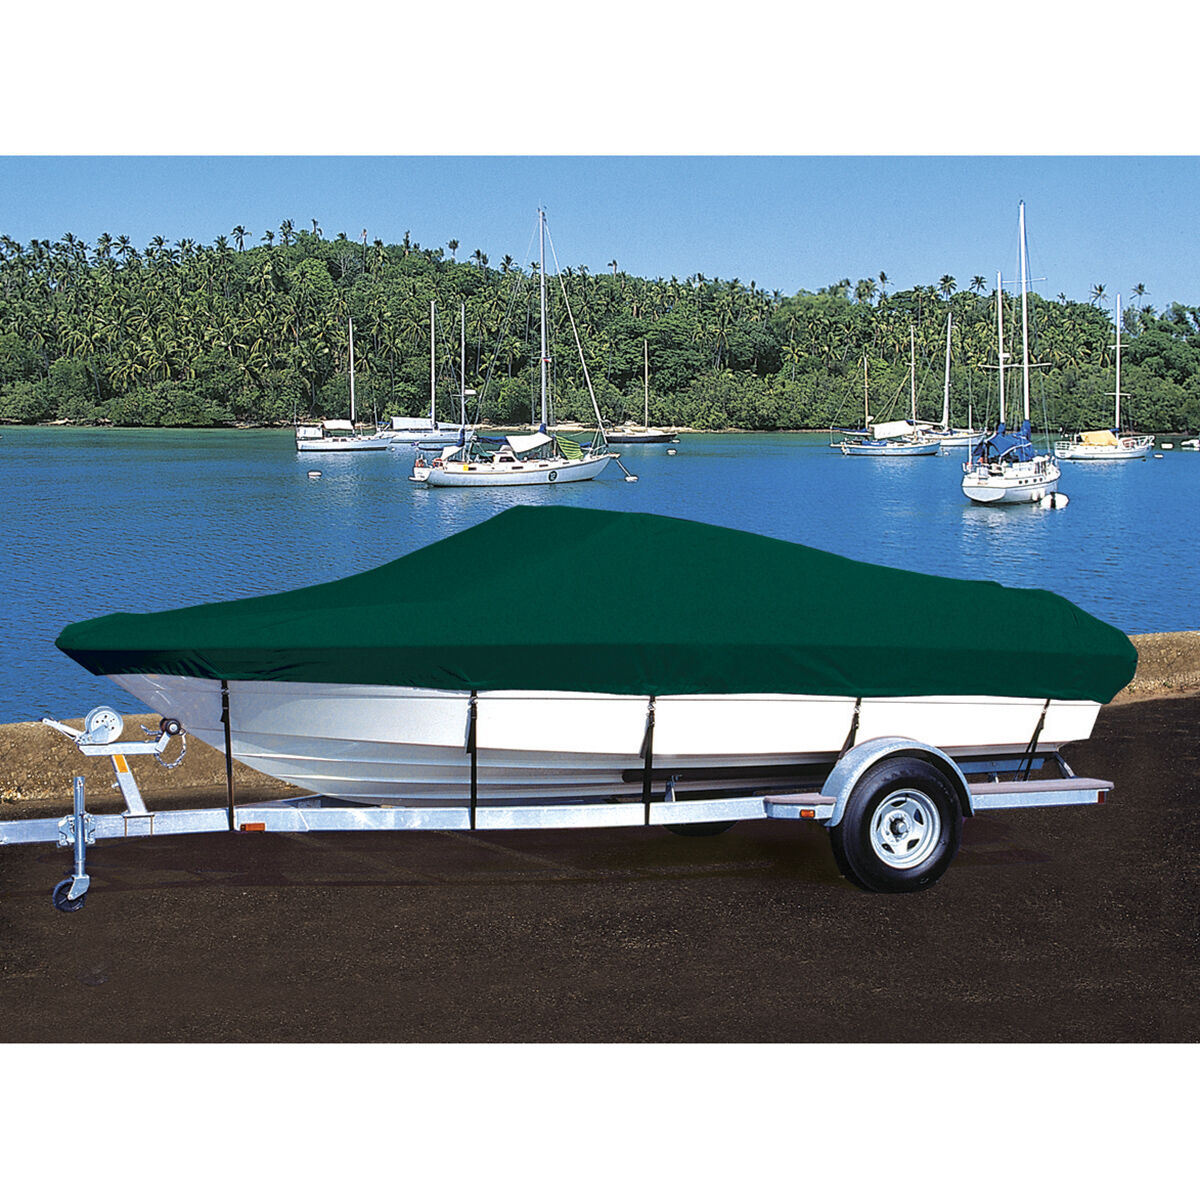 Taylor Made Trailerite Hot Shot Cover for 92-96 Sea Swirl 180 SE Bow Rider I/O Boat Cover in Green Polyester